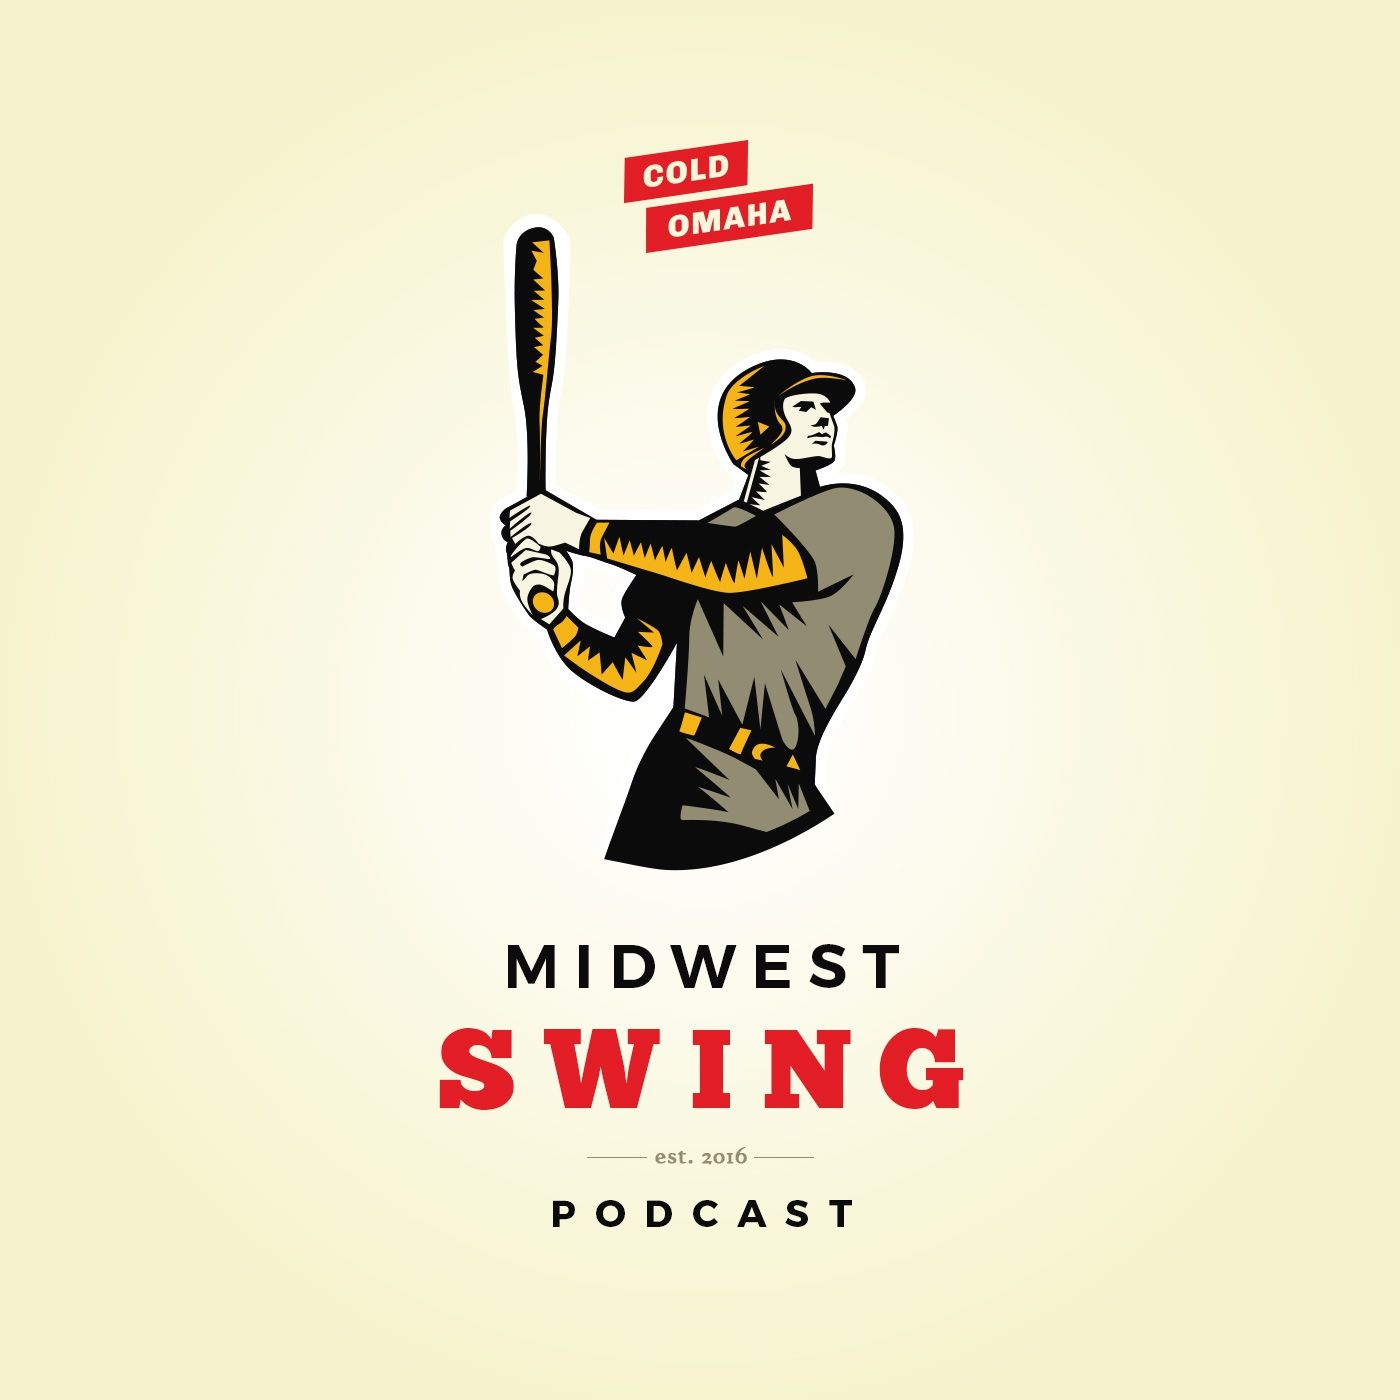 Midwest Swing Podcast